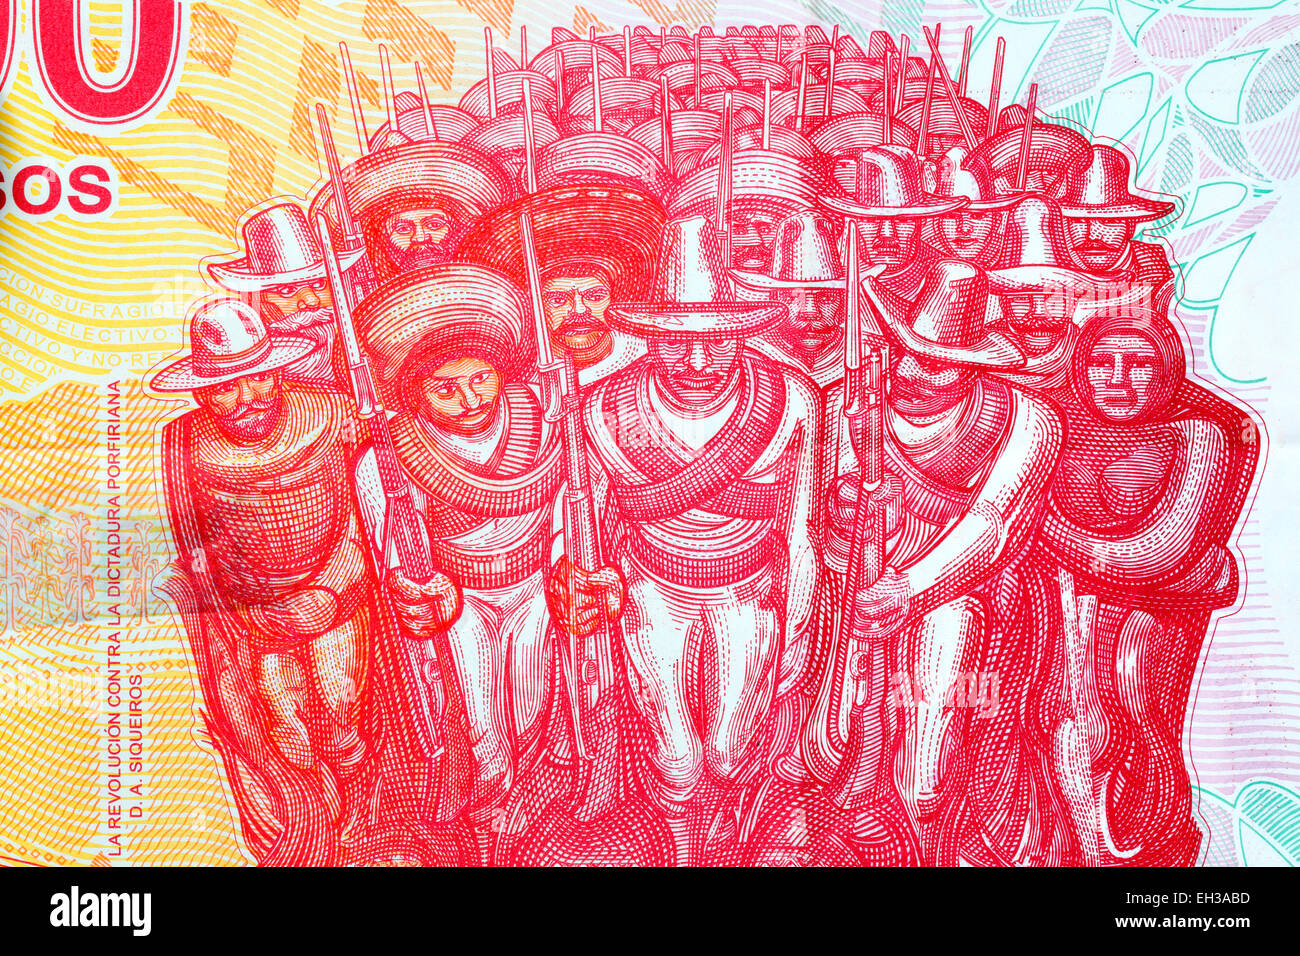 Fragment of the mural by Mexican painter David Alfaro Siqueiros from 100 pesos banknote, Mexico, 2007 Stock Photo